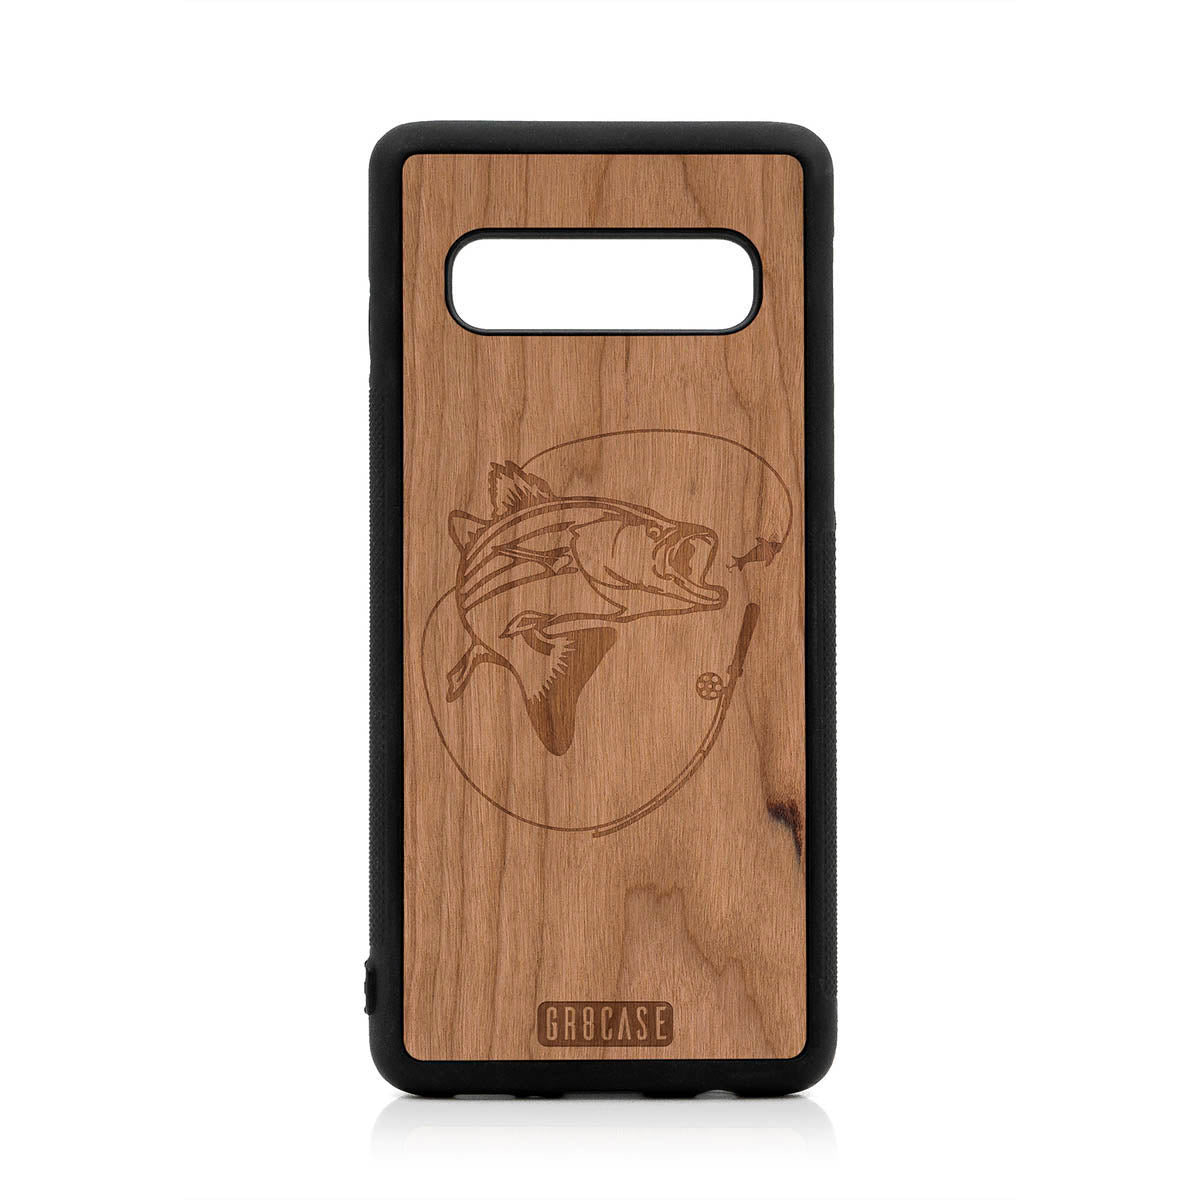 Fish and Reel Design Wood Case For Samsung Galaxy S10 by GR8CASE